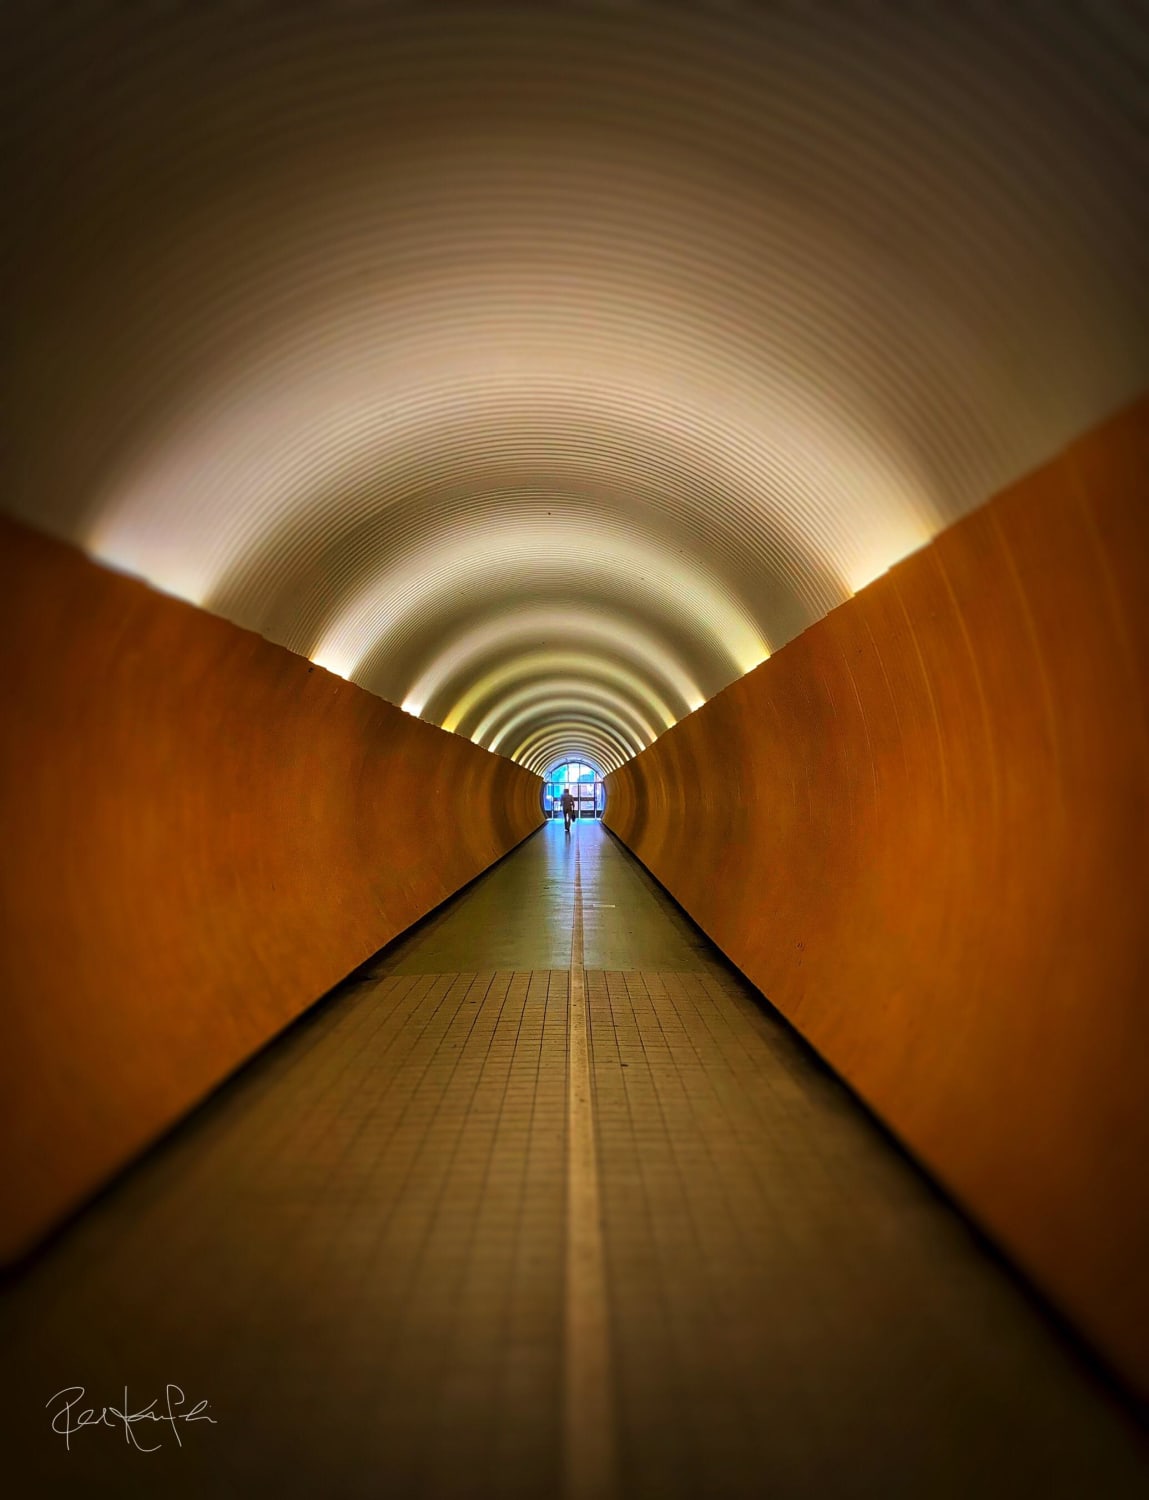 Brunkebergs tunnel is a 231 meters long shortcut for cyclists and pedestrians in the city center of Stockholm, no smell of urine and no graffiti..